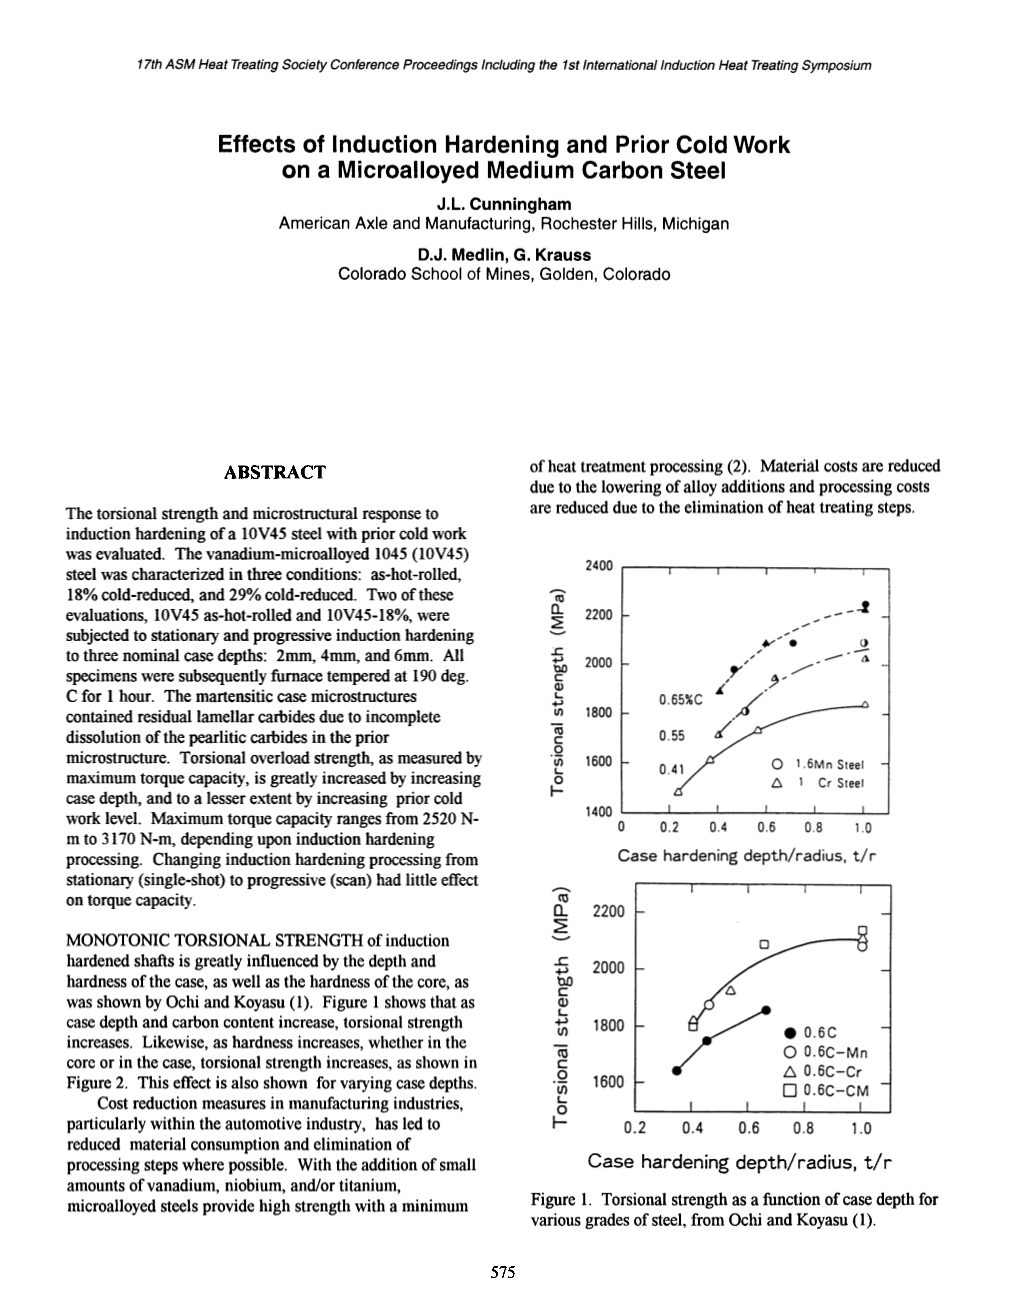 Effects of Induction Hardening and Prior Cold Work on a Microalloyed Medium Carbon Steel